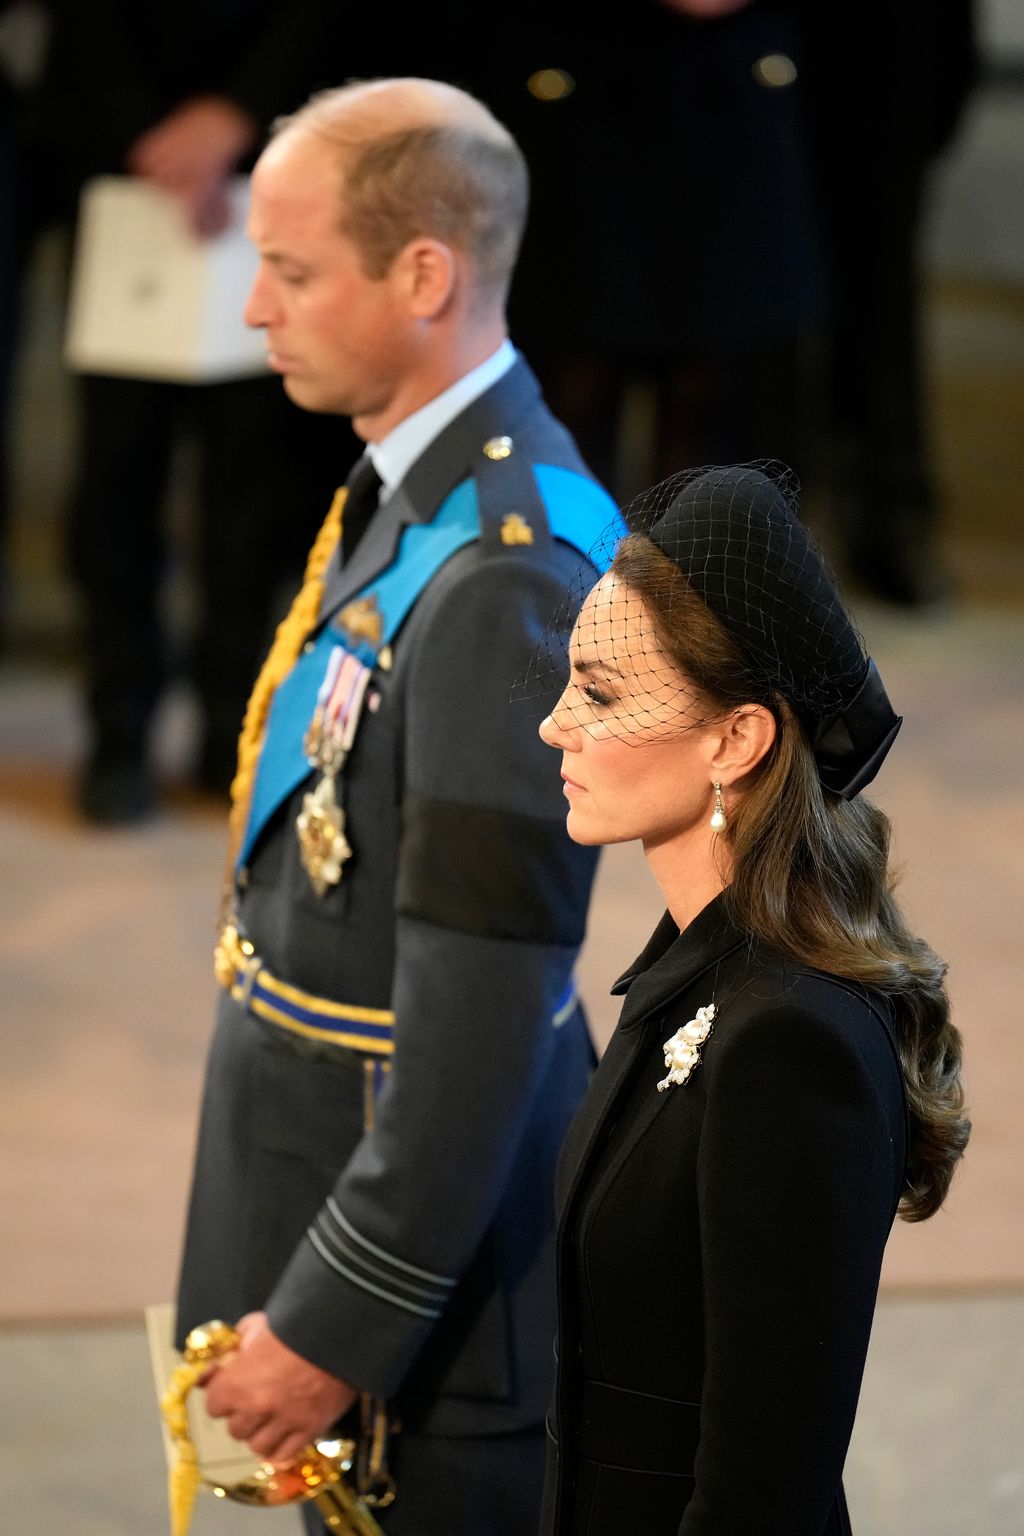 LONDON, ENGLAND - SEPTEMBER 14: Prince William, Prince of Wales and Catherine, Princess of Wales pay their respects in The Palace of Westminster during the procession for the Lying-in State of Queen Elizabeth II on September 14, 2022 in London, England. Queen Elizabeth II's coffin is taken in procession on a Gun Carriage of The King's Troop Royal Horse Artillery from Buckingham Palace to Westminster Hall where she will lay in state until the early morning of her funeral. Queen Elizabeth II died at Balmoral Castle in Scotland on September 8, 2022, and is succeeded by her eldest son, King Charles III.  (Photo by Christopher Furlong/Getty Images)